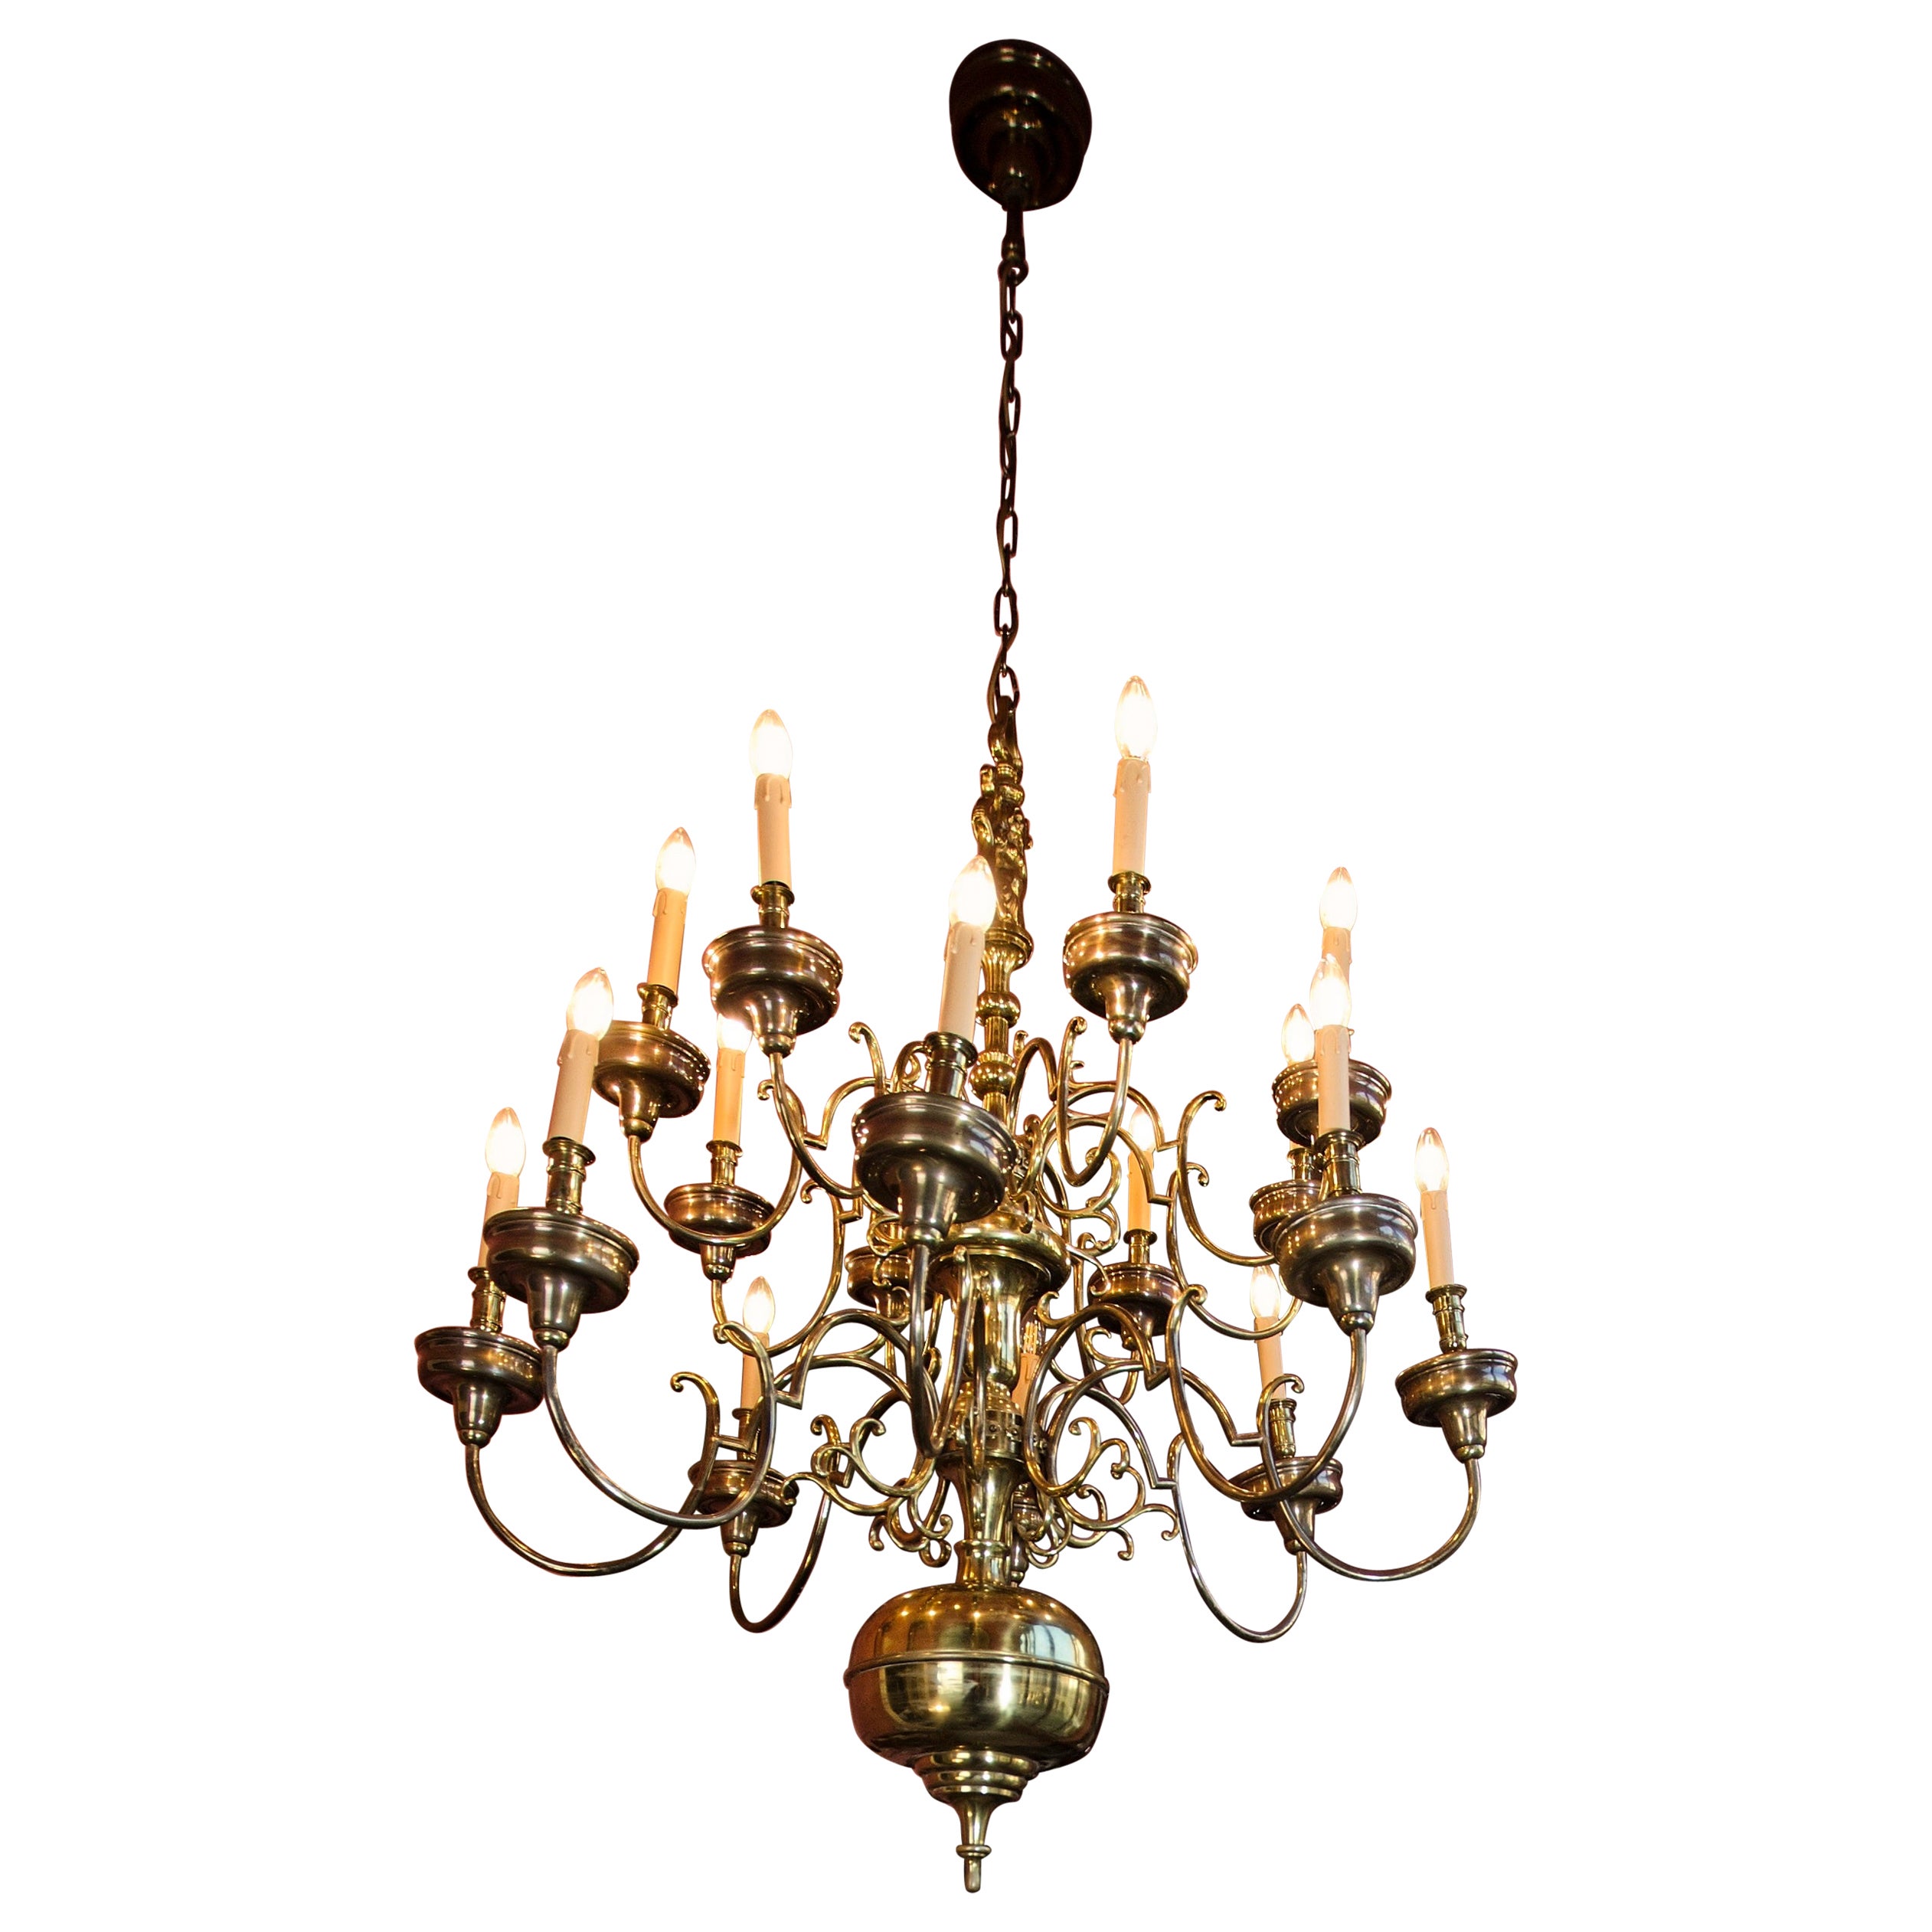 Large castle chandelier with a mermaid, 16 arms For Sale